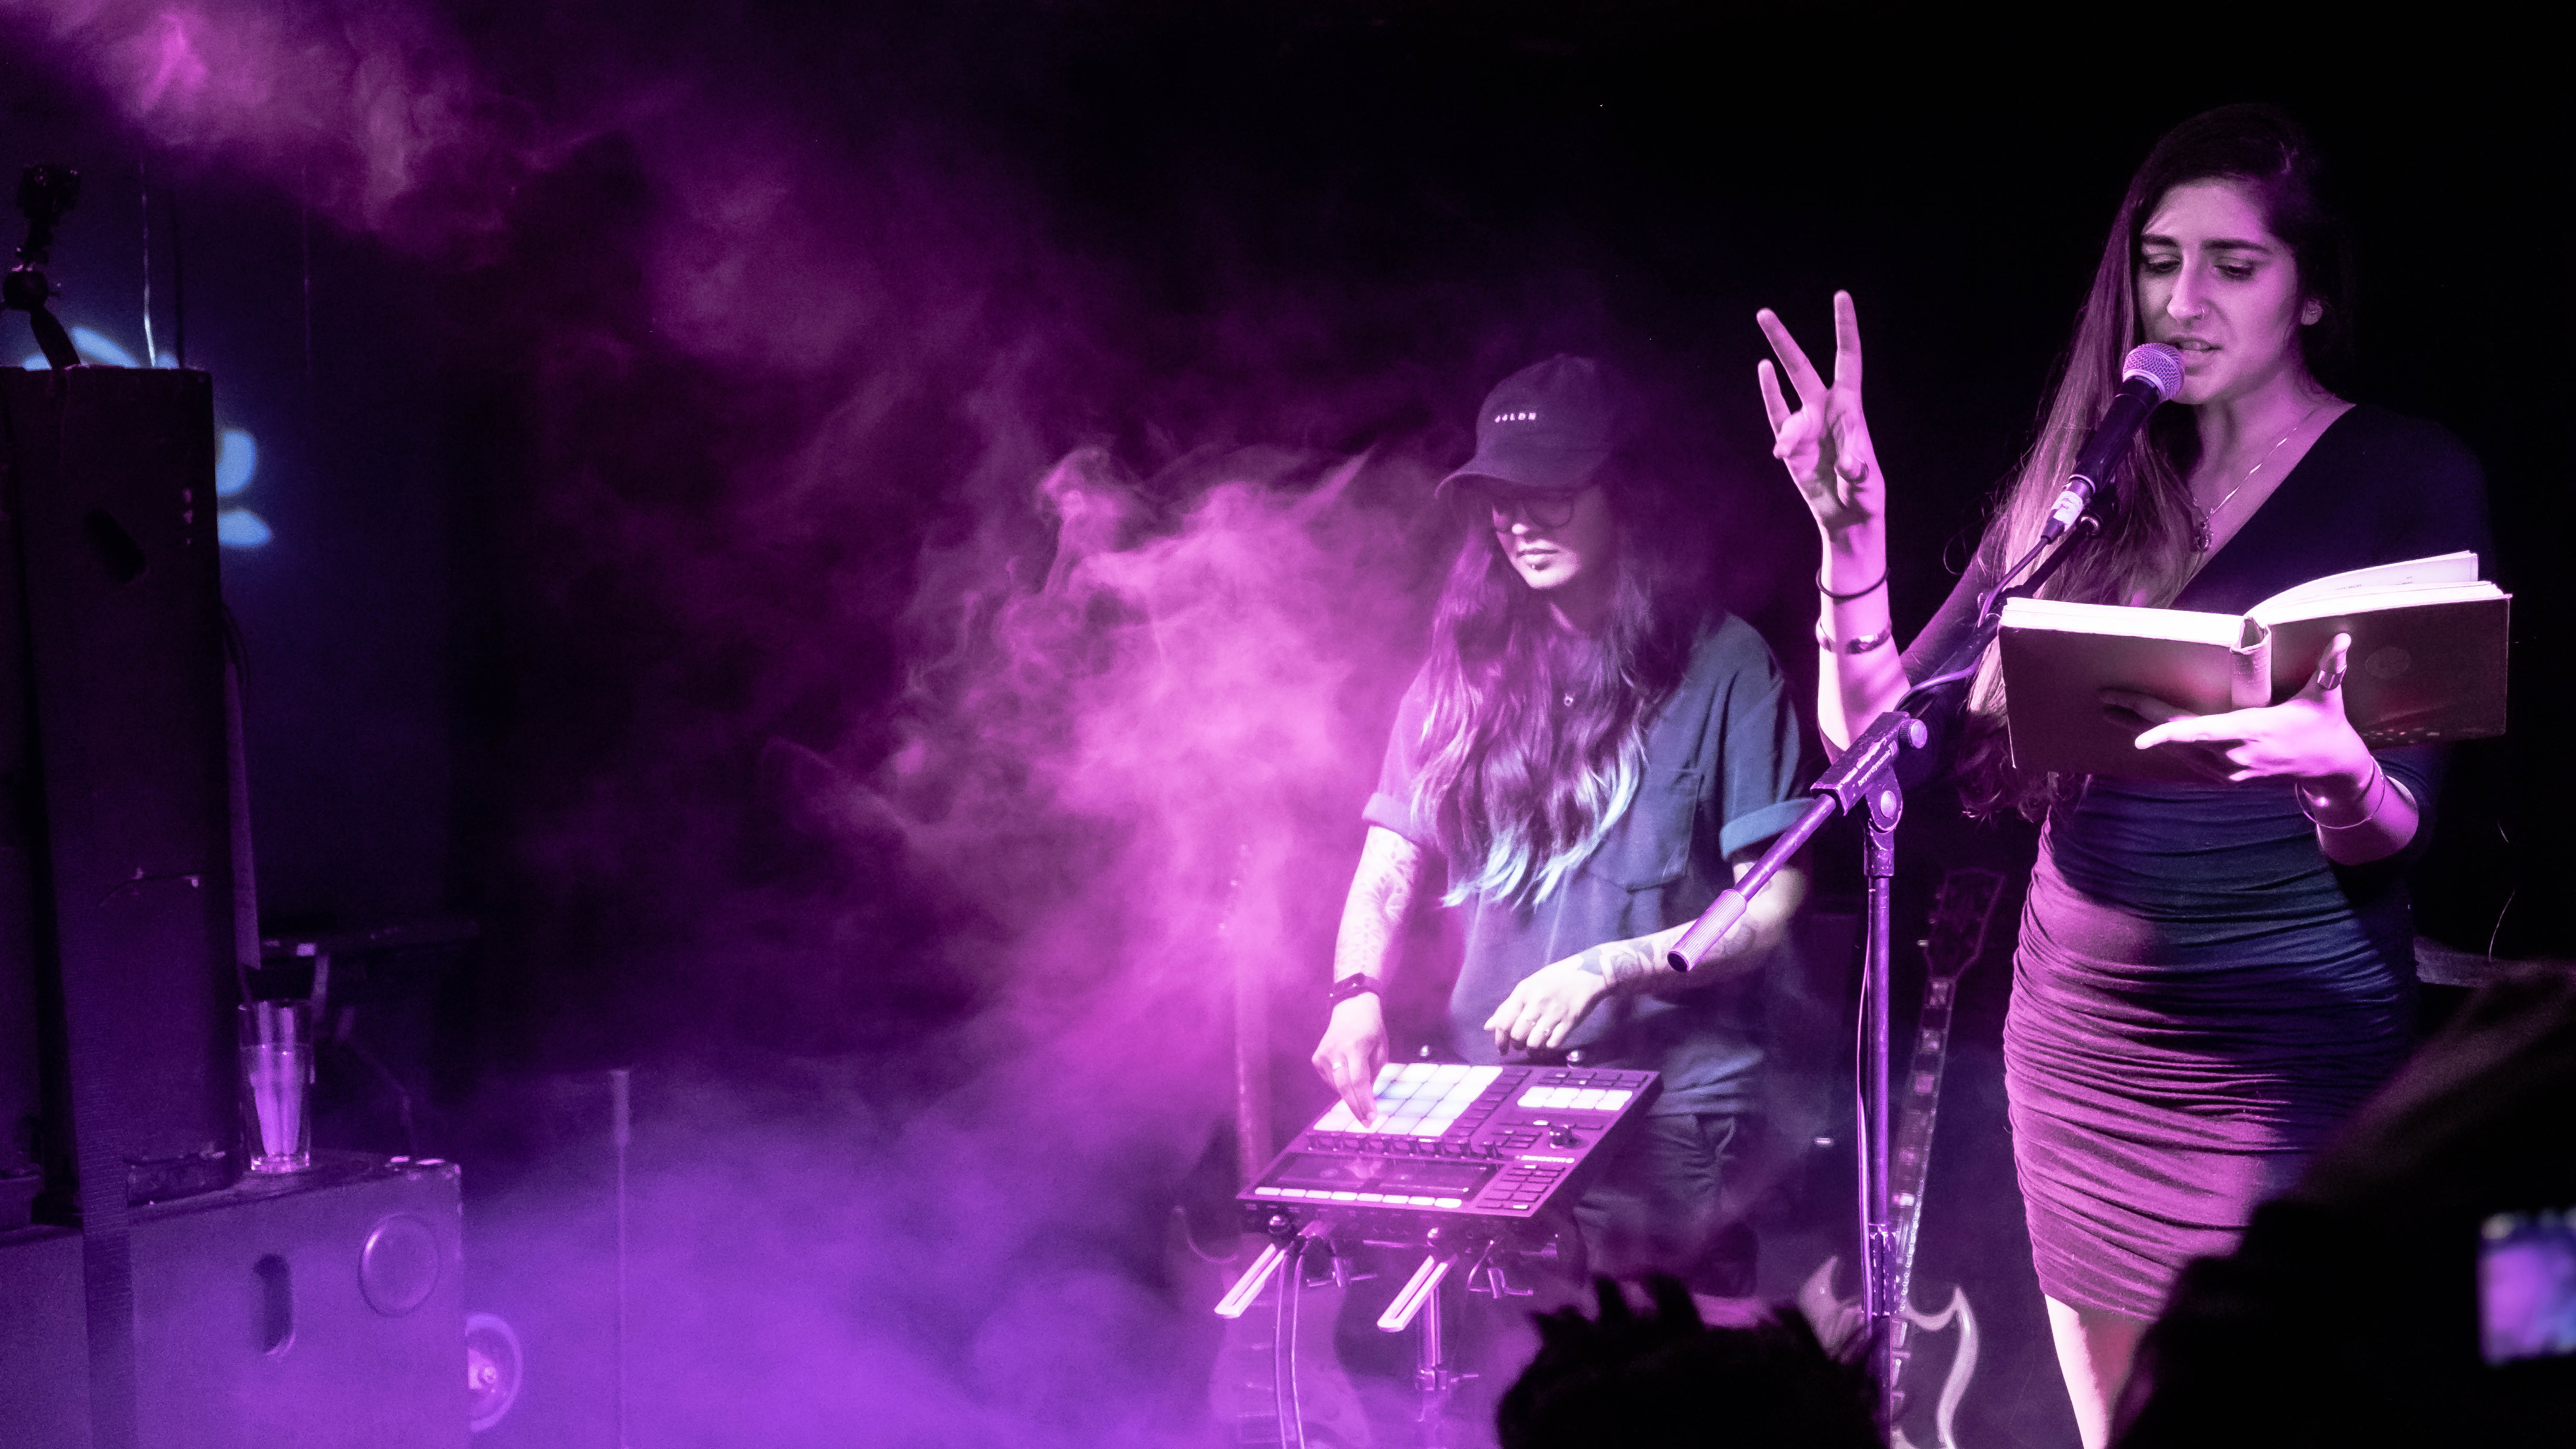 A colour photograph of performers Gnarly and Nikita on a purple lit stage.